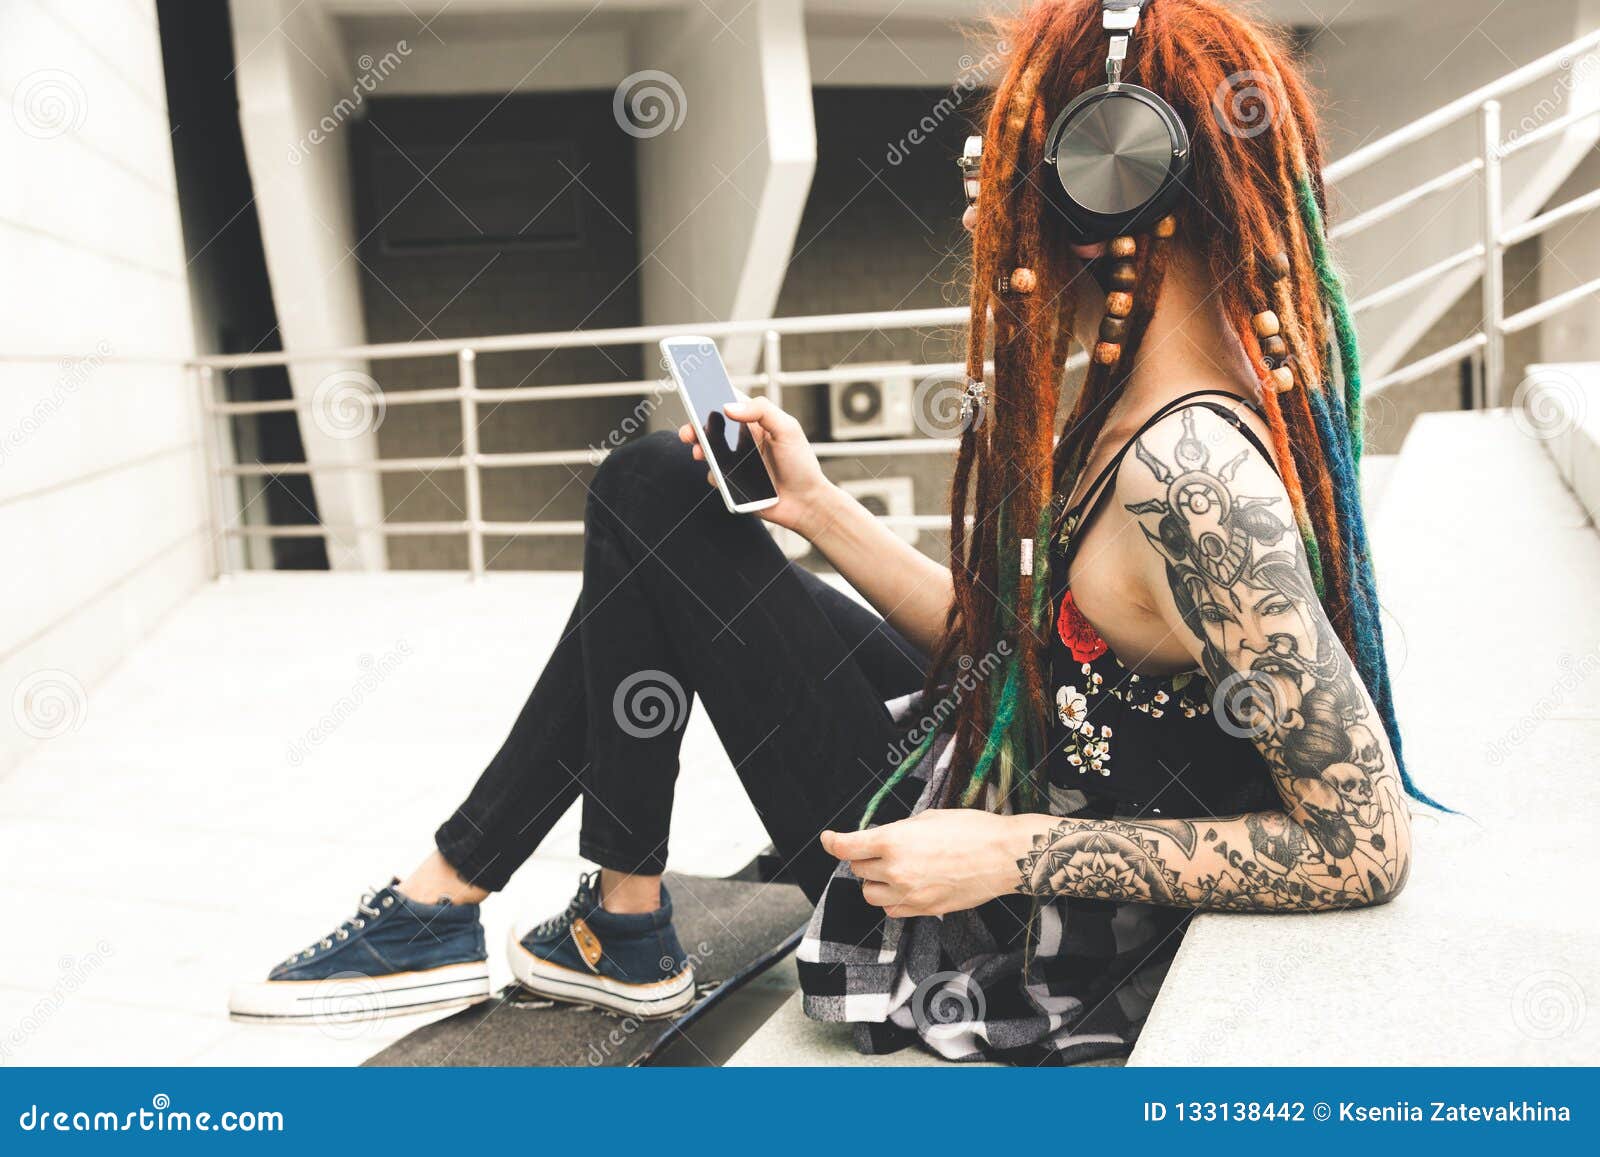 Young Girl With Tattoo And Dreadlocks Listening To Music